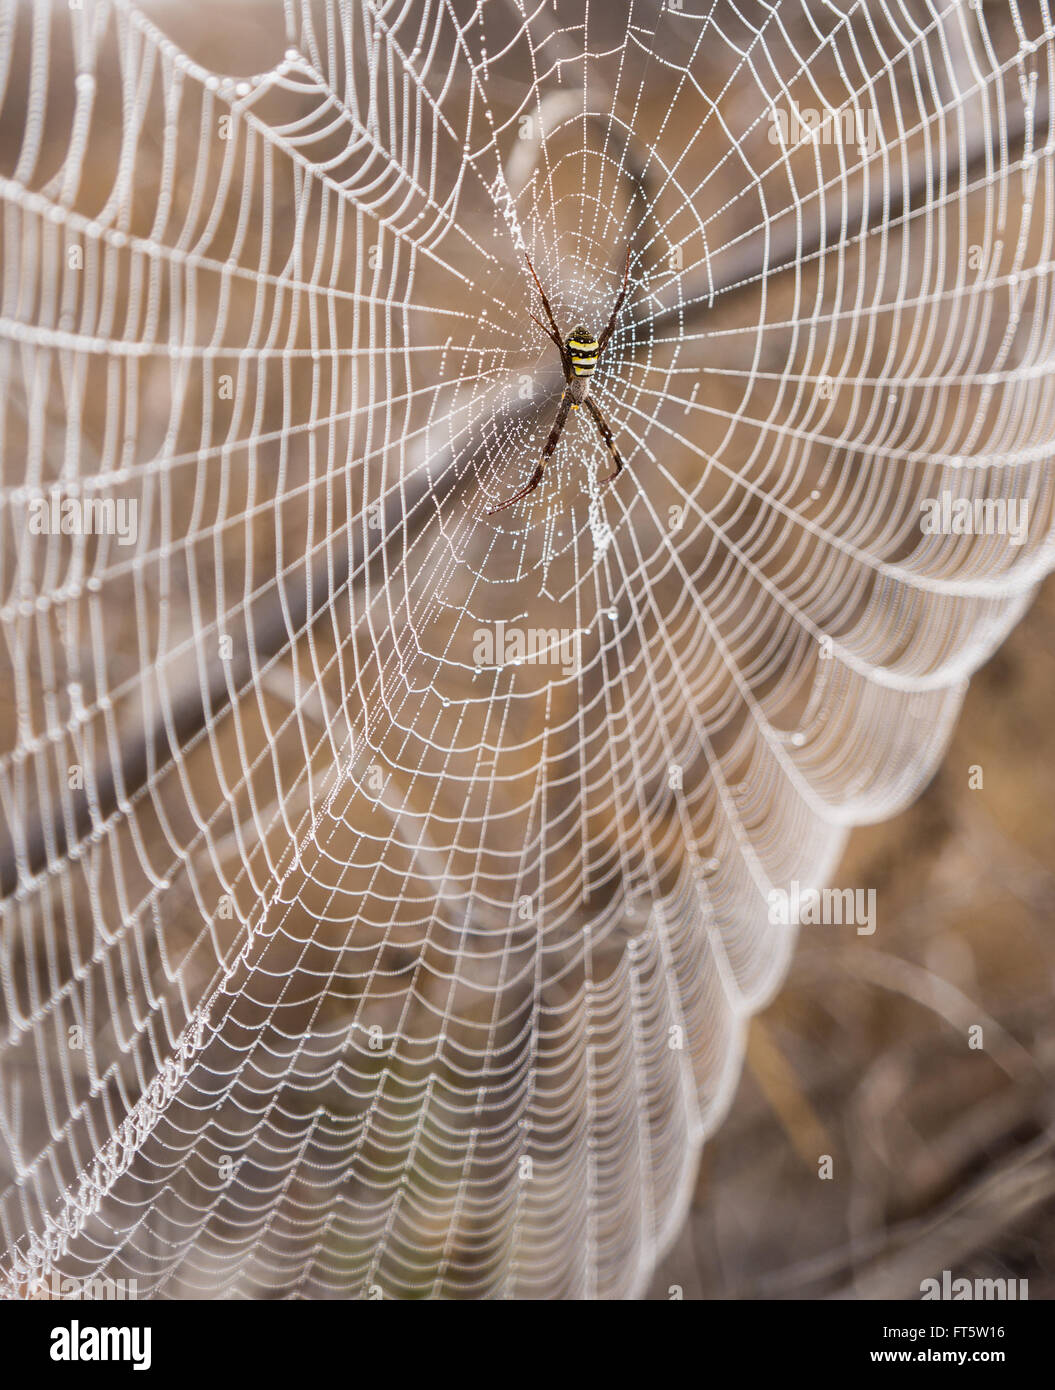 St Andrew's Cross spider, Argiope Keyserlingi, and web with dew drops Stock Photo